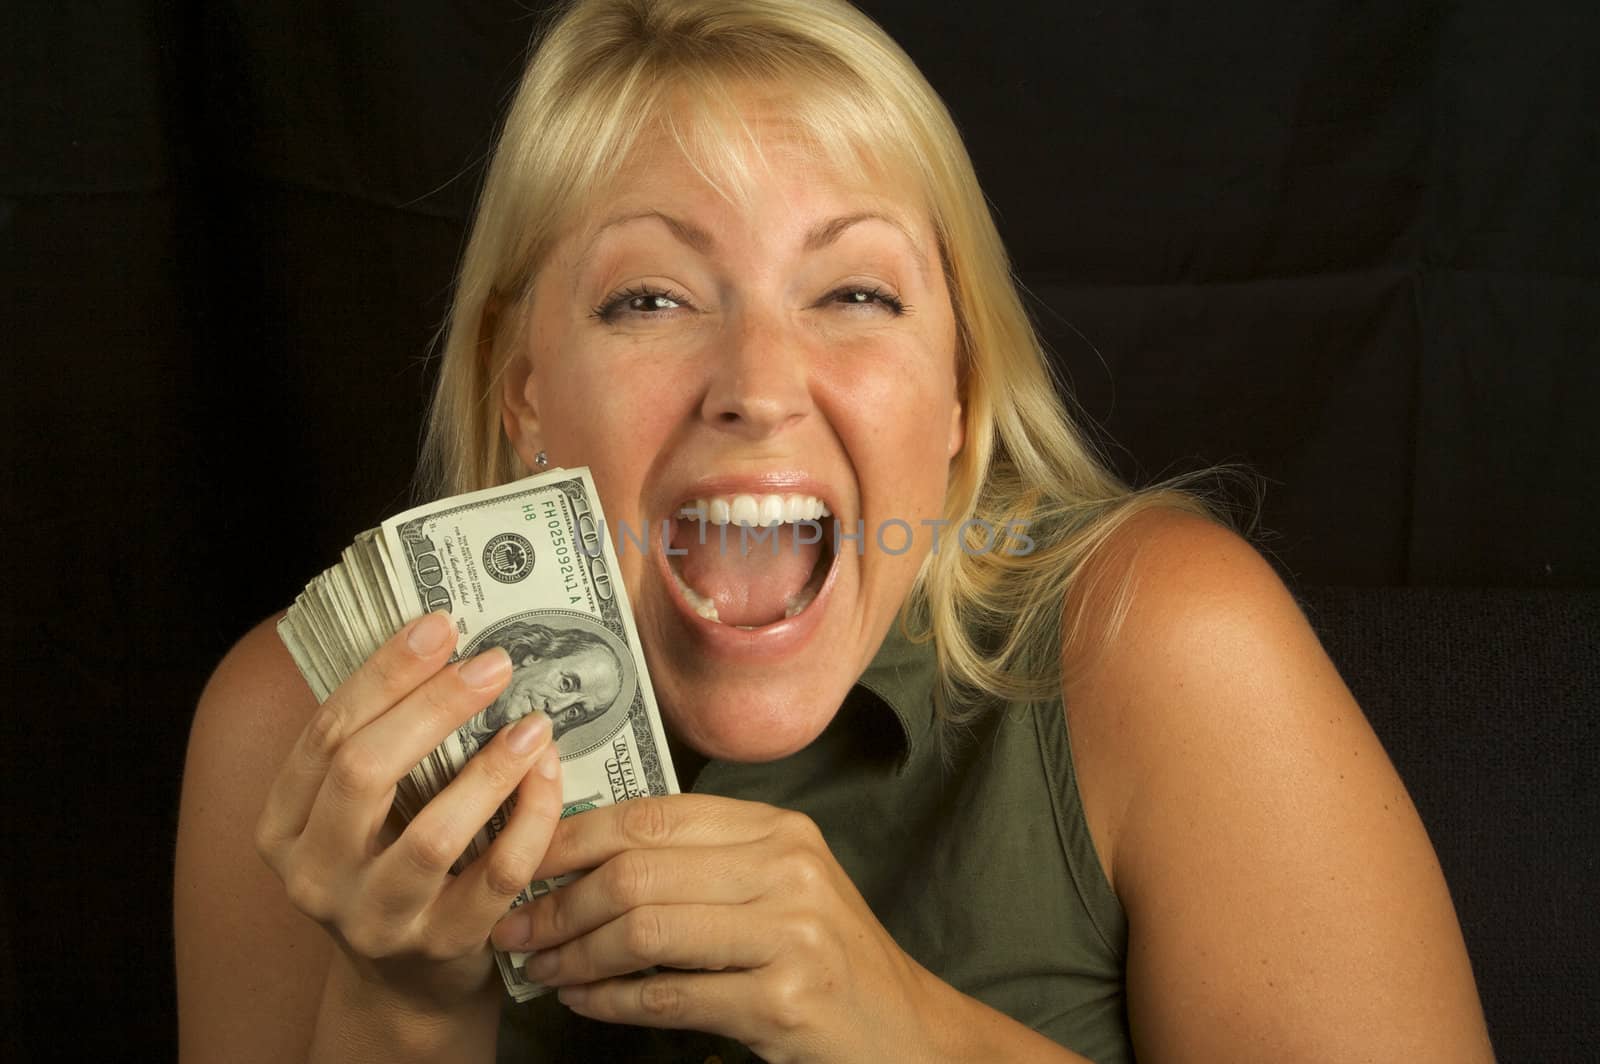 Attractive Woman Excited About her Stack of Money She Holds.